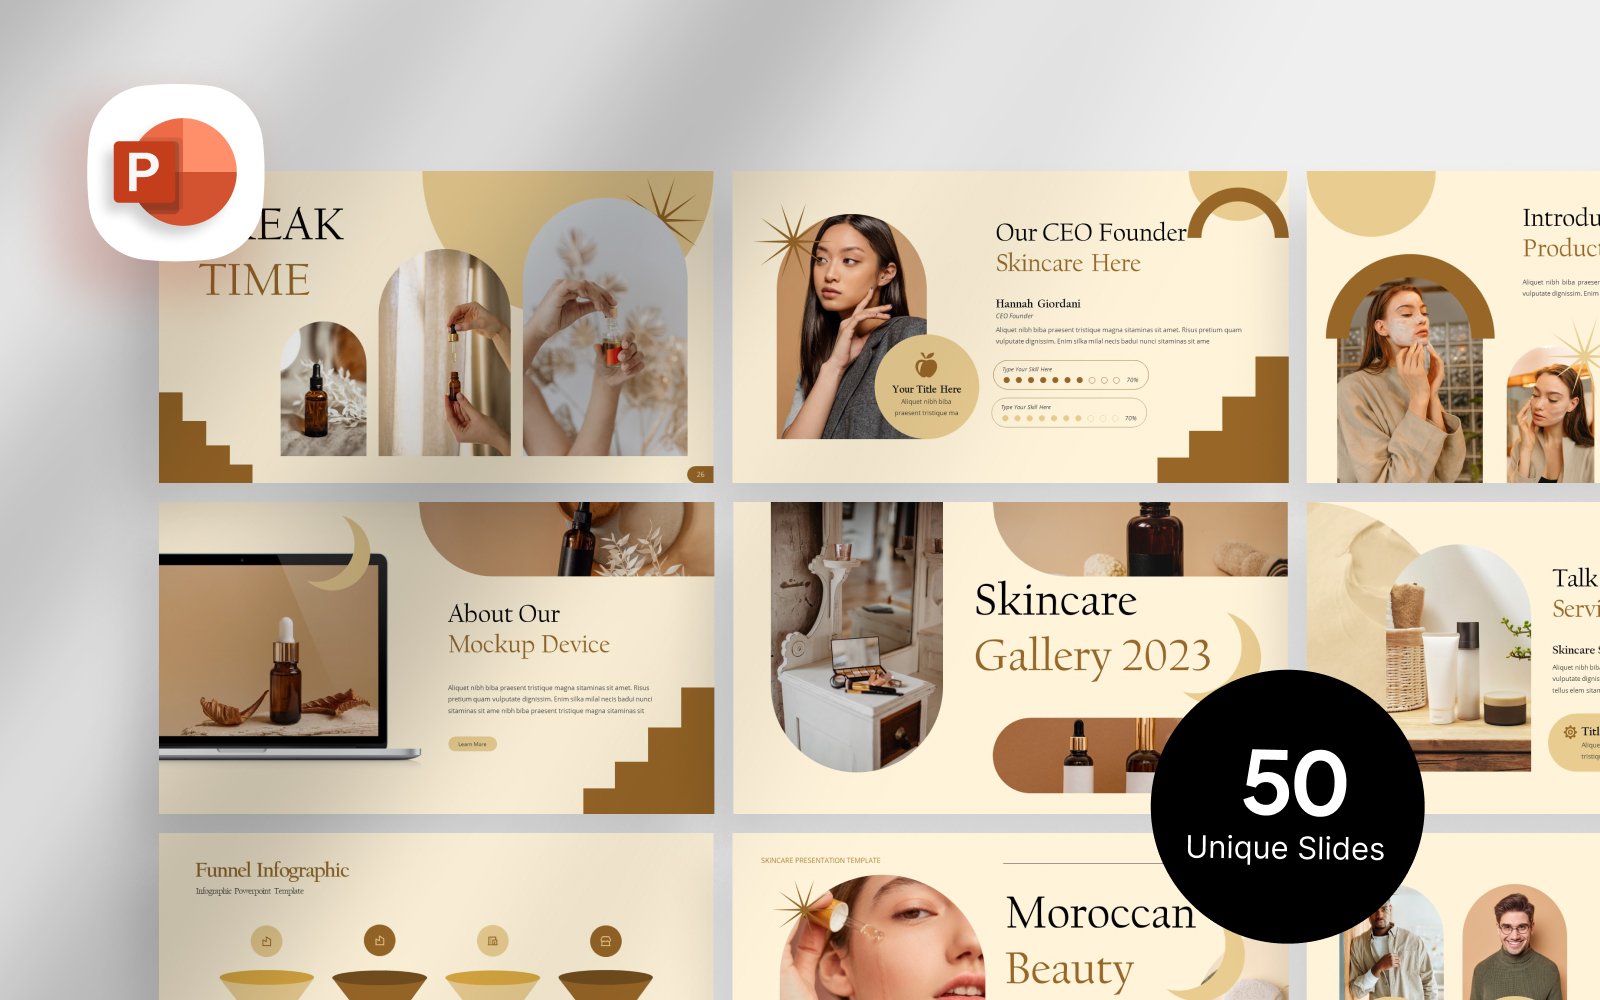 Moroccan Beauty Product Presentation Template